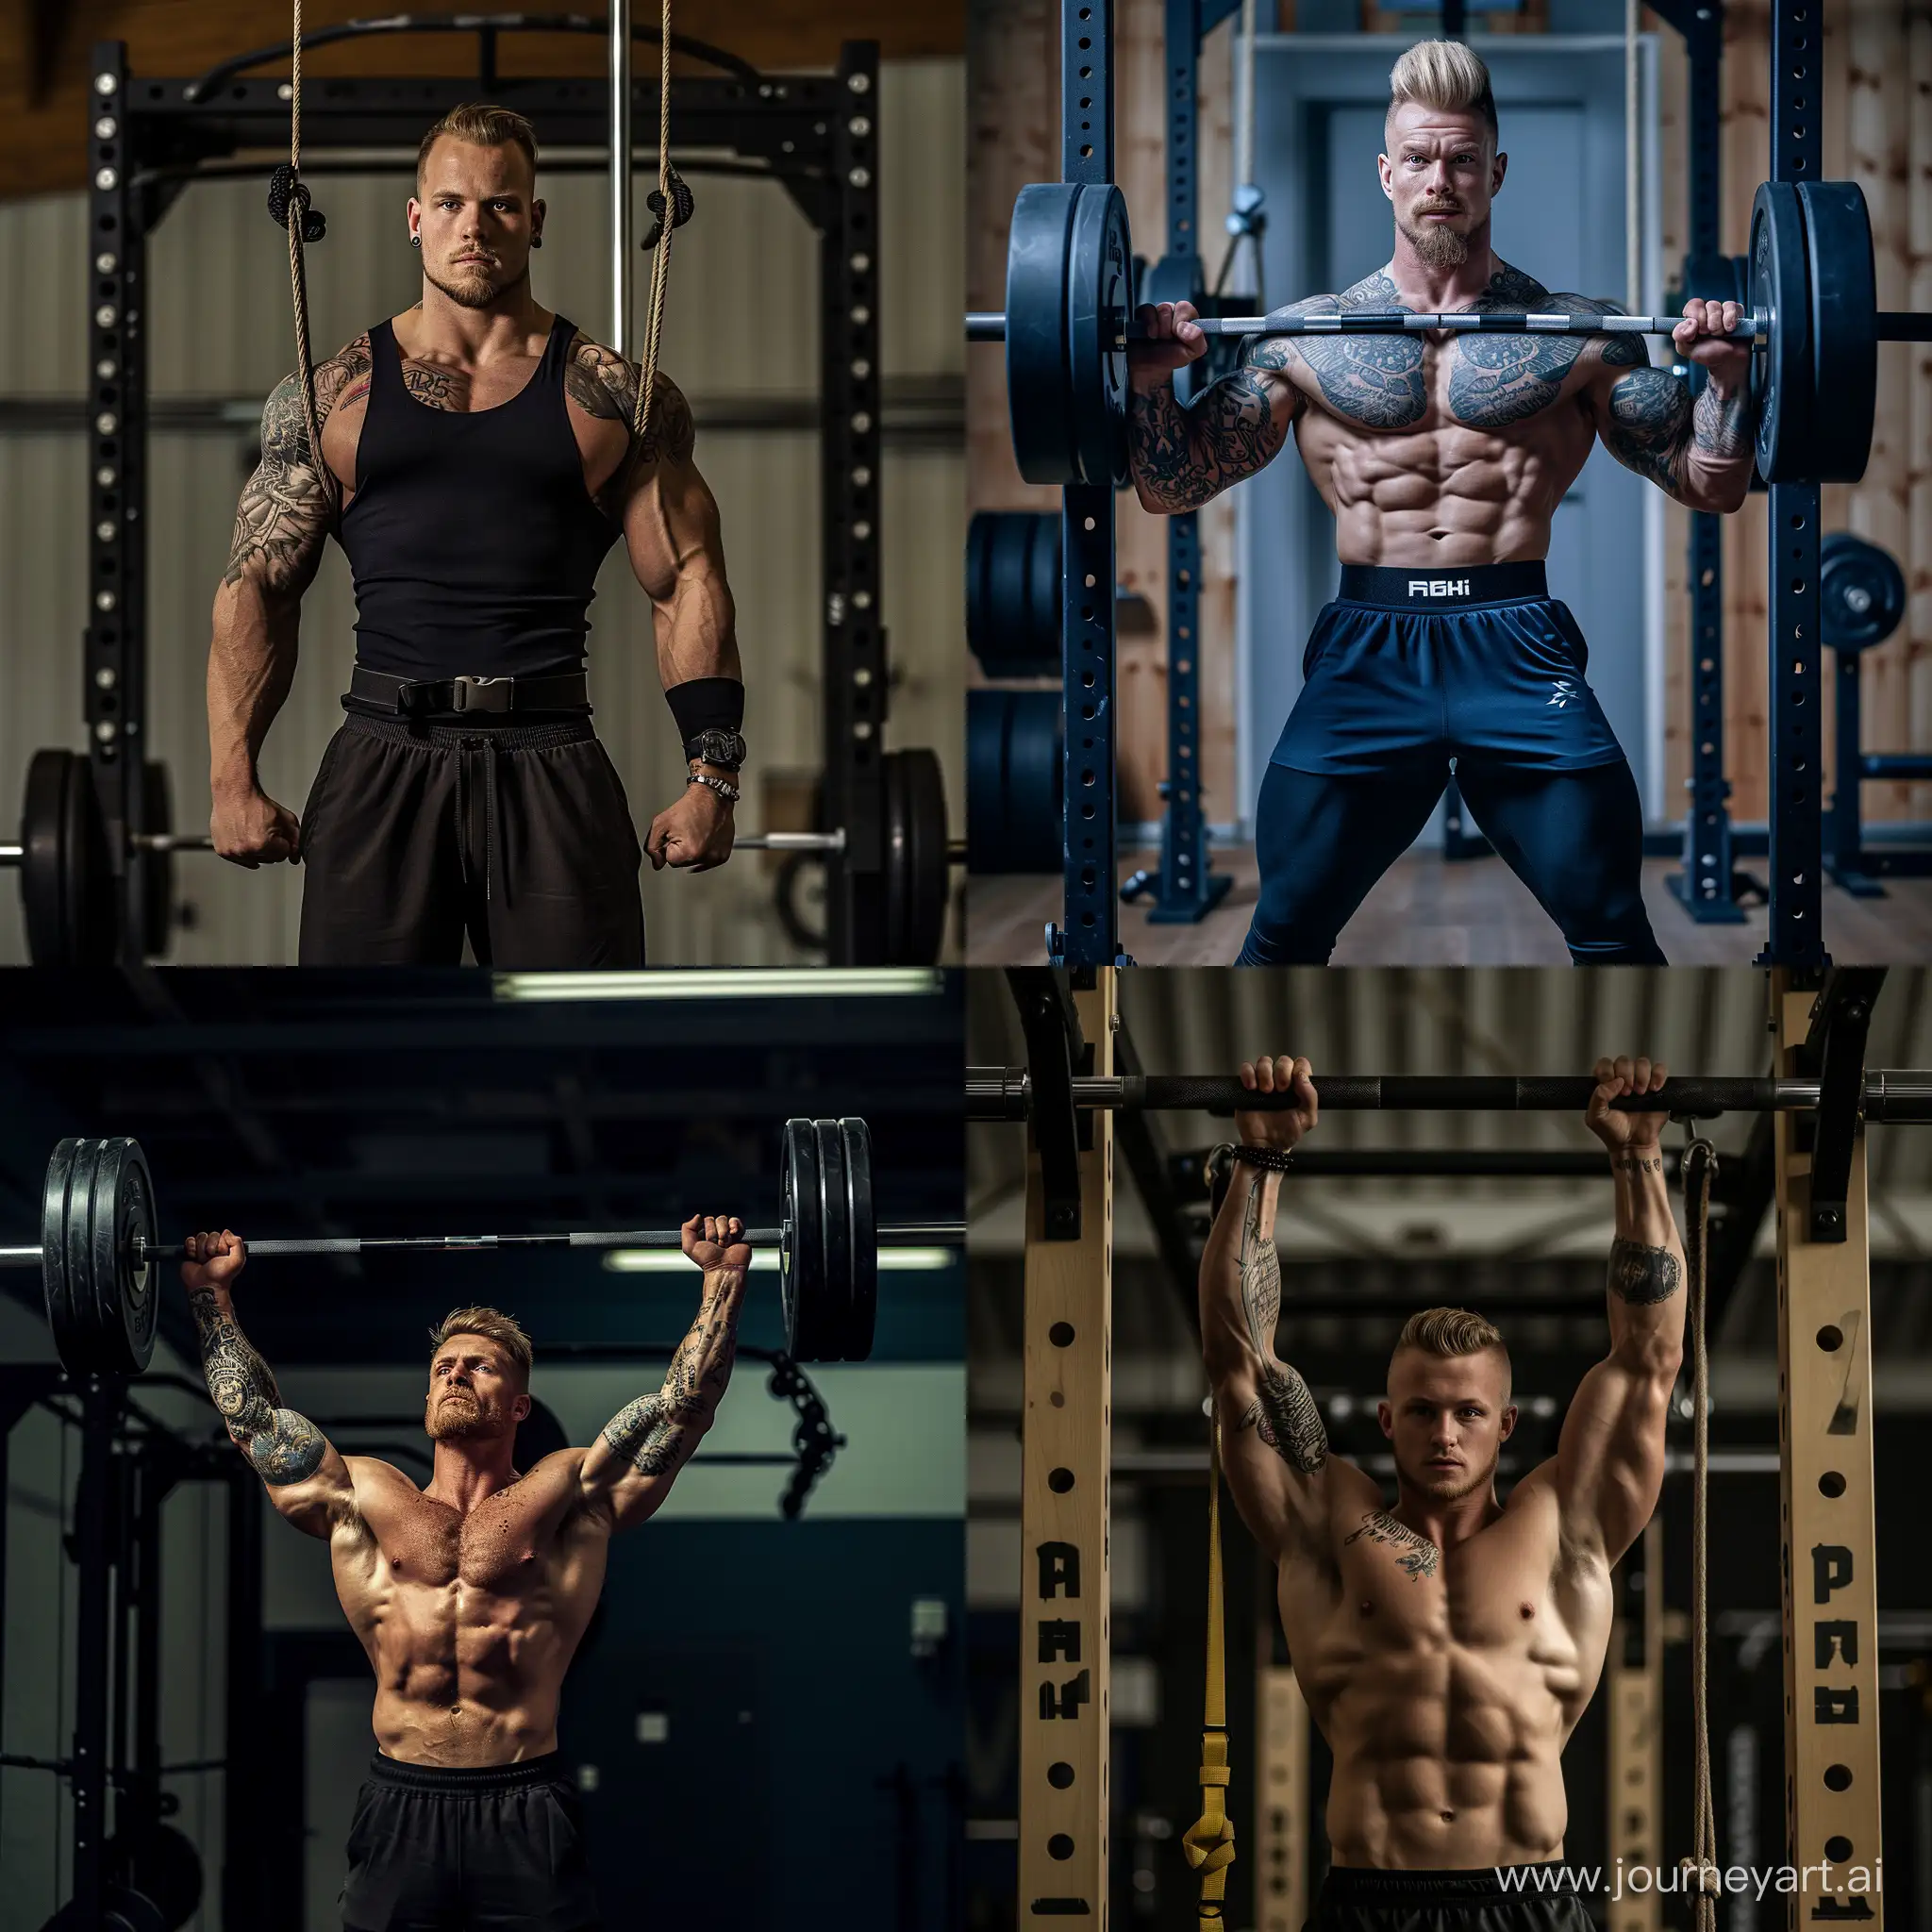 Photorealistic-Finnish-Crossfitter-Stunning-3D-Artwork-of-an-Athlete-in-Action